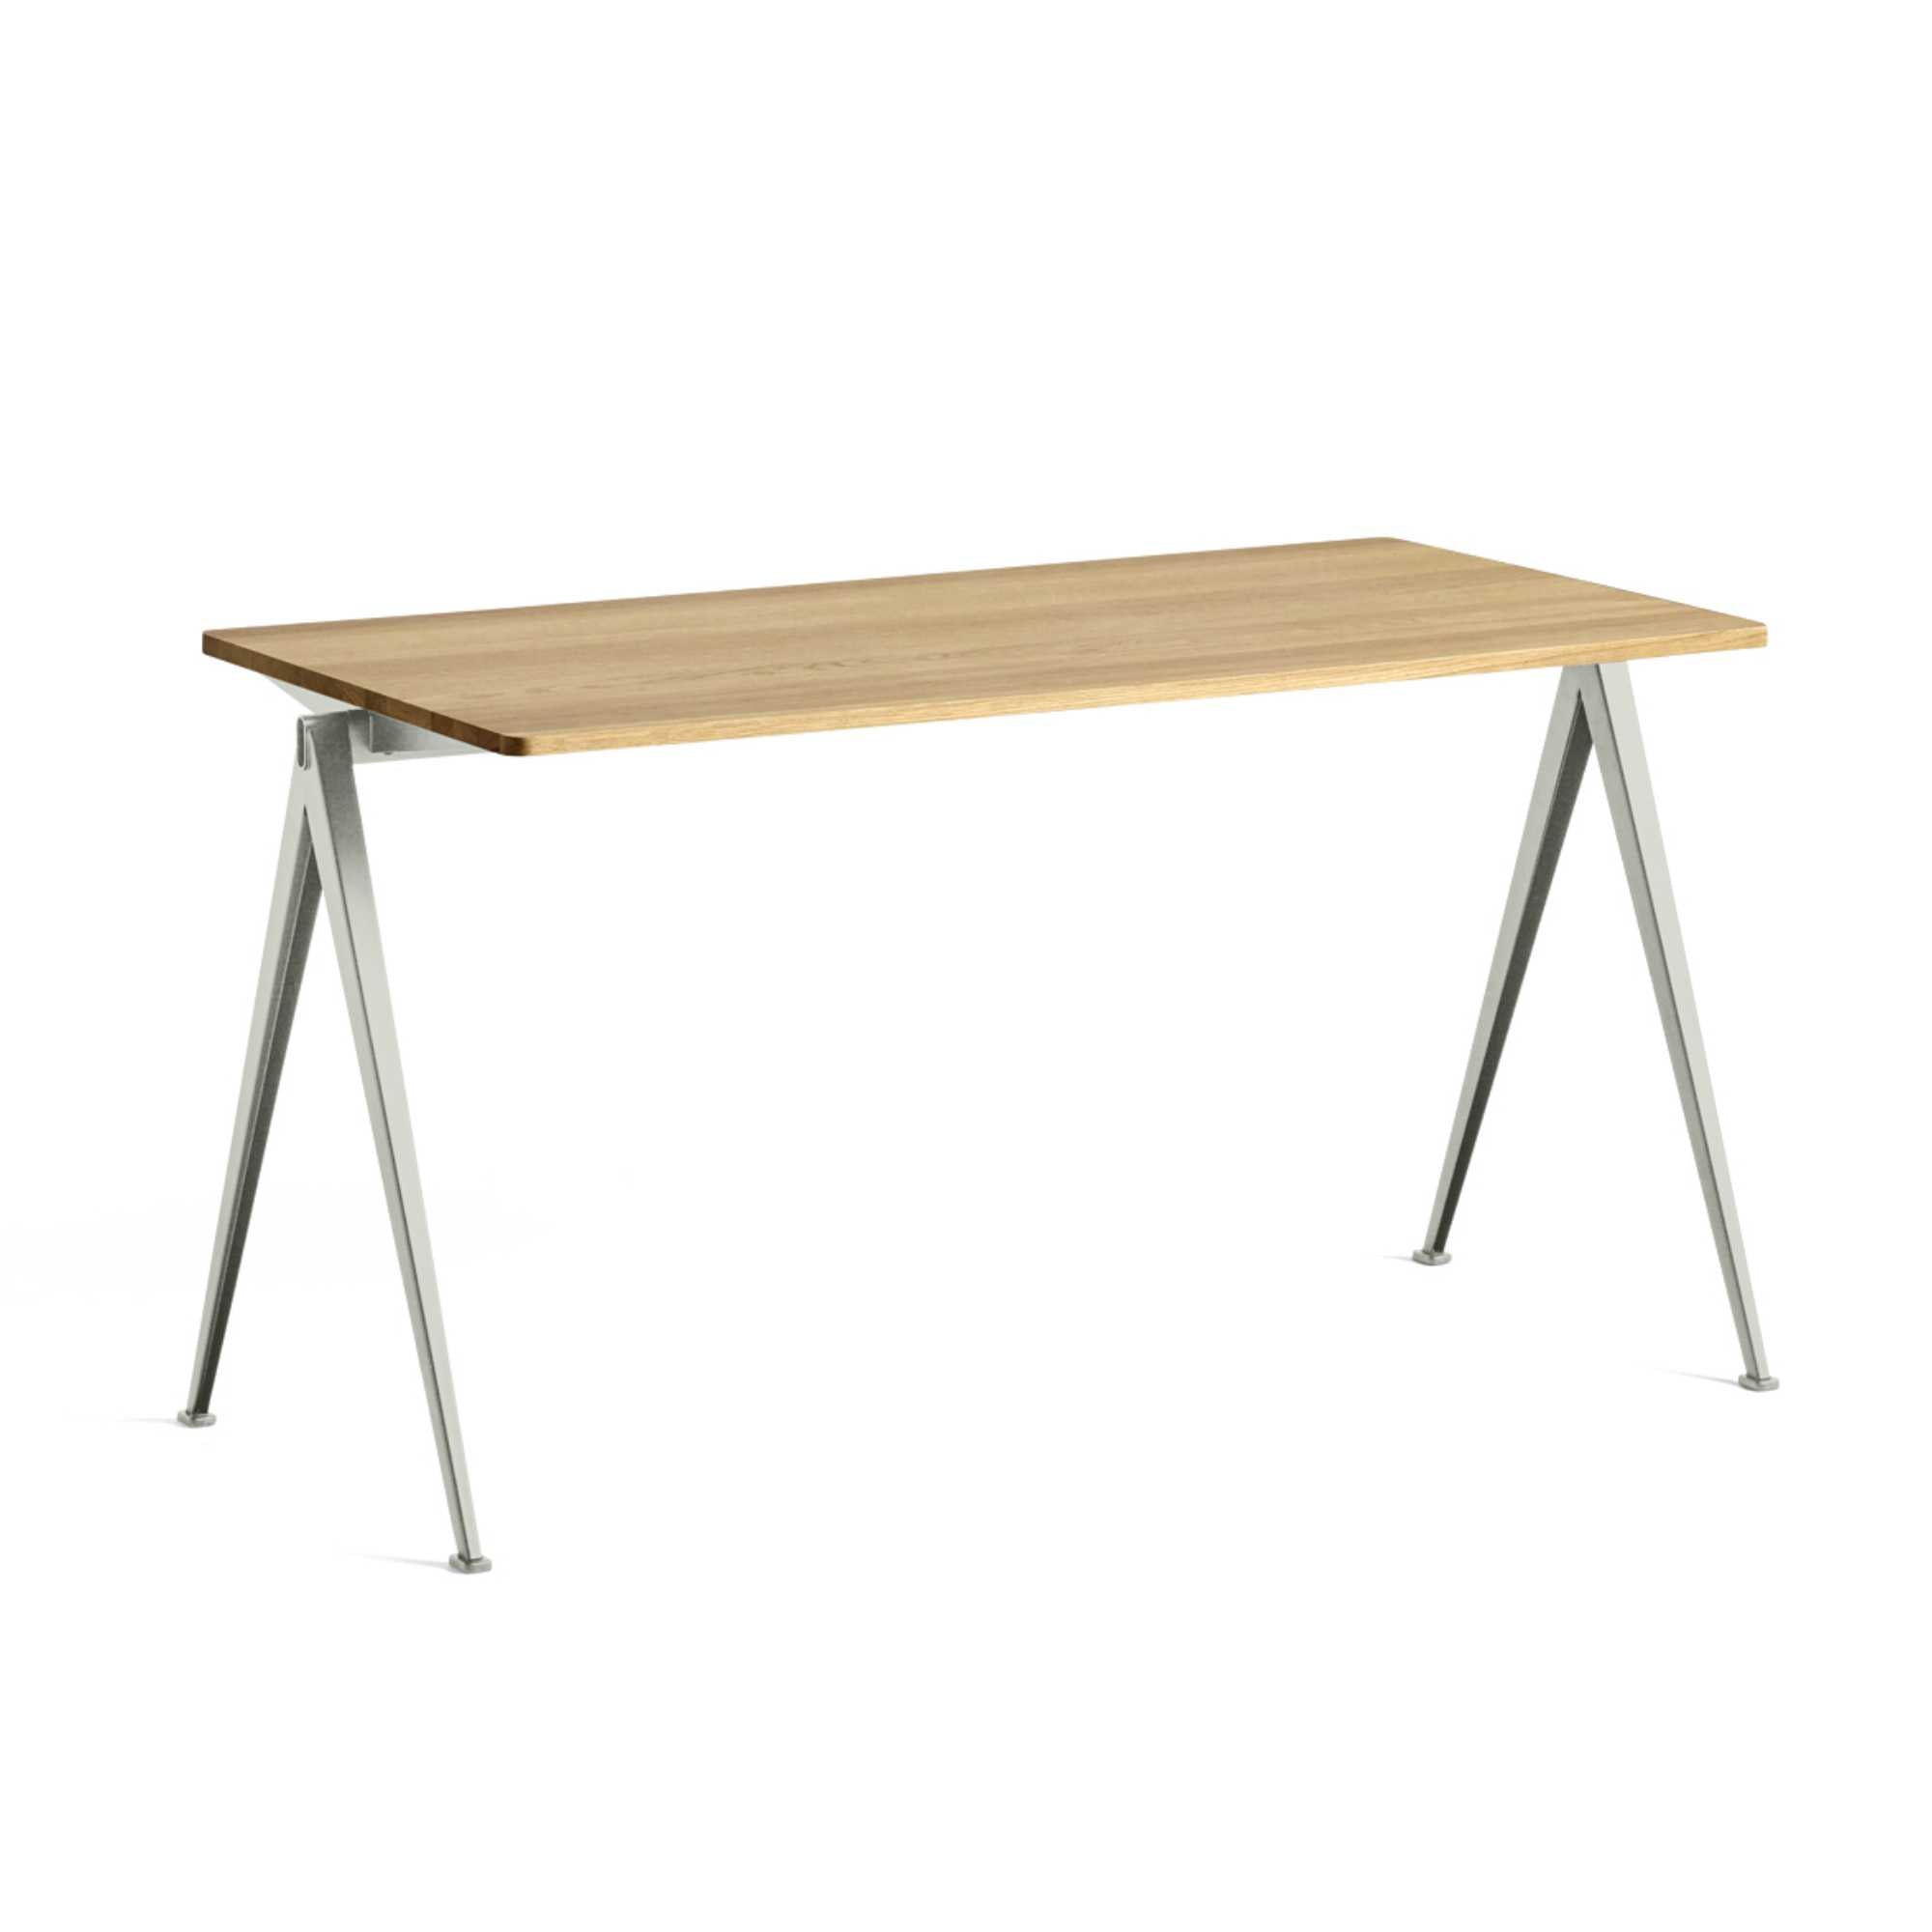 Hay Pyramid 01 Desk, Beige Powder Coated Steel Frame/Clear Lacquered Solid Oak Table Top (140x65cm)